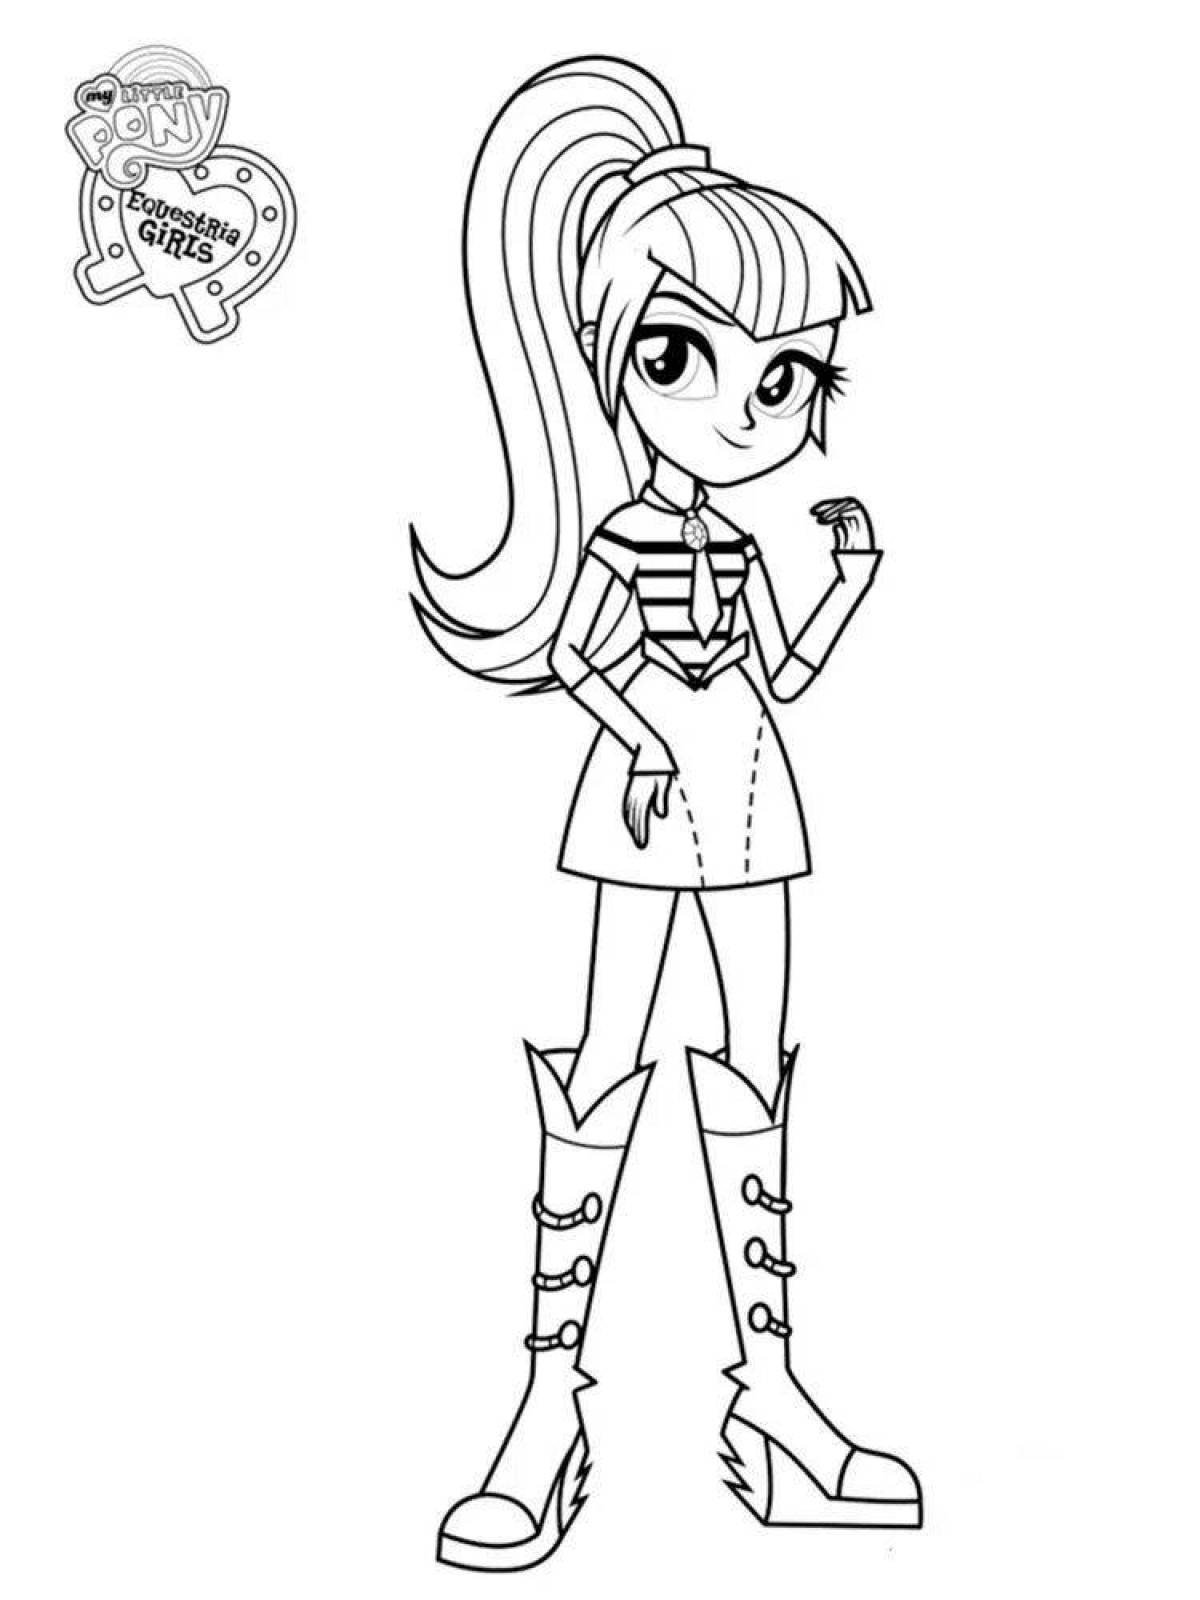 Fabulous pony people coloring page